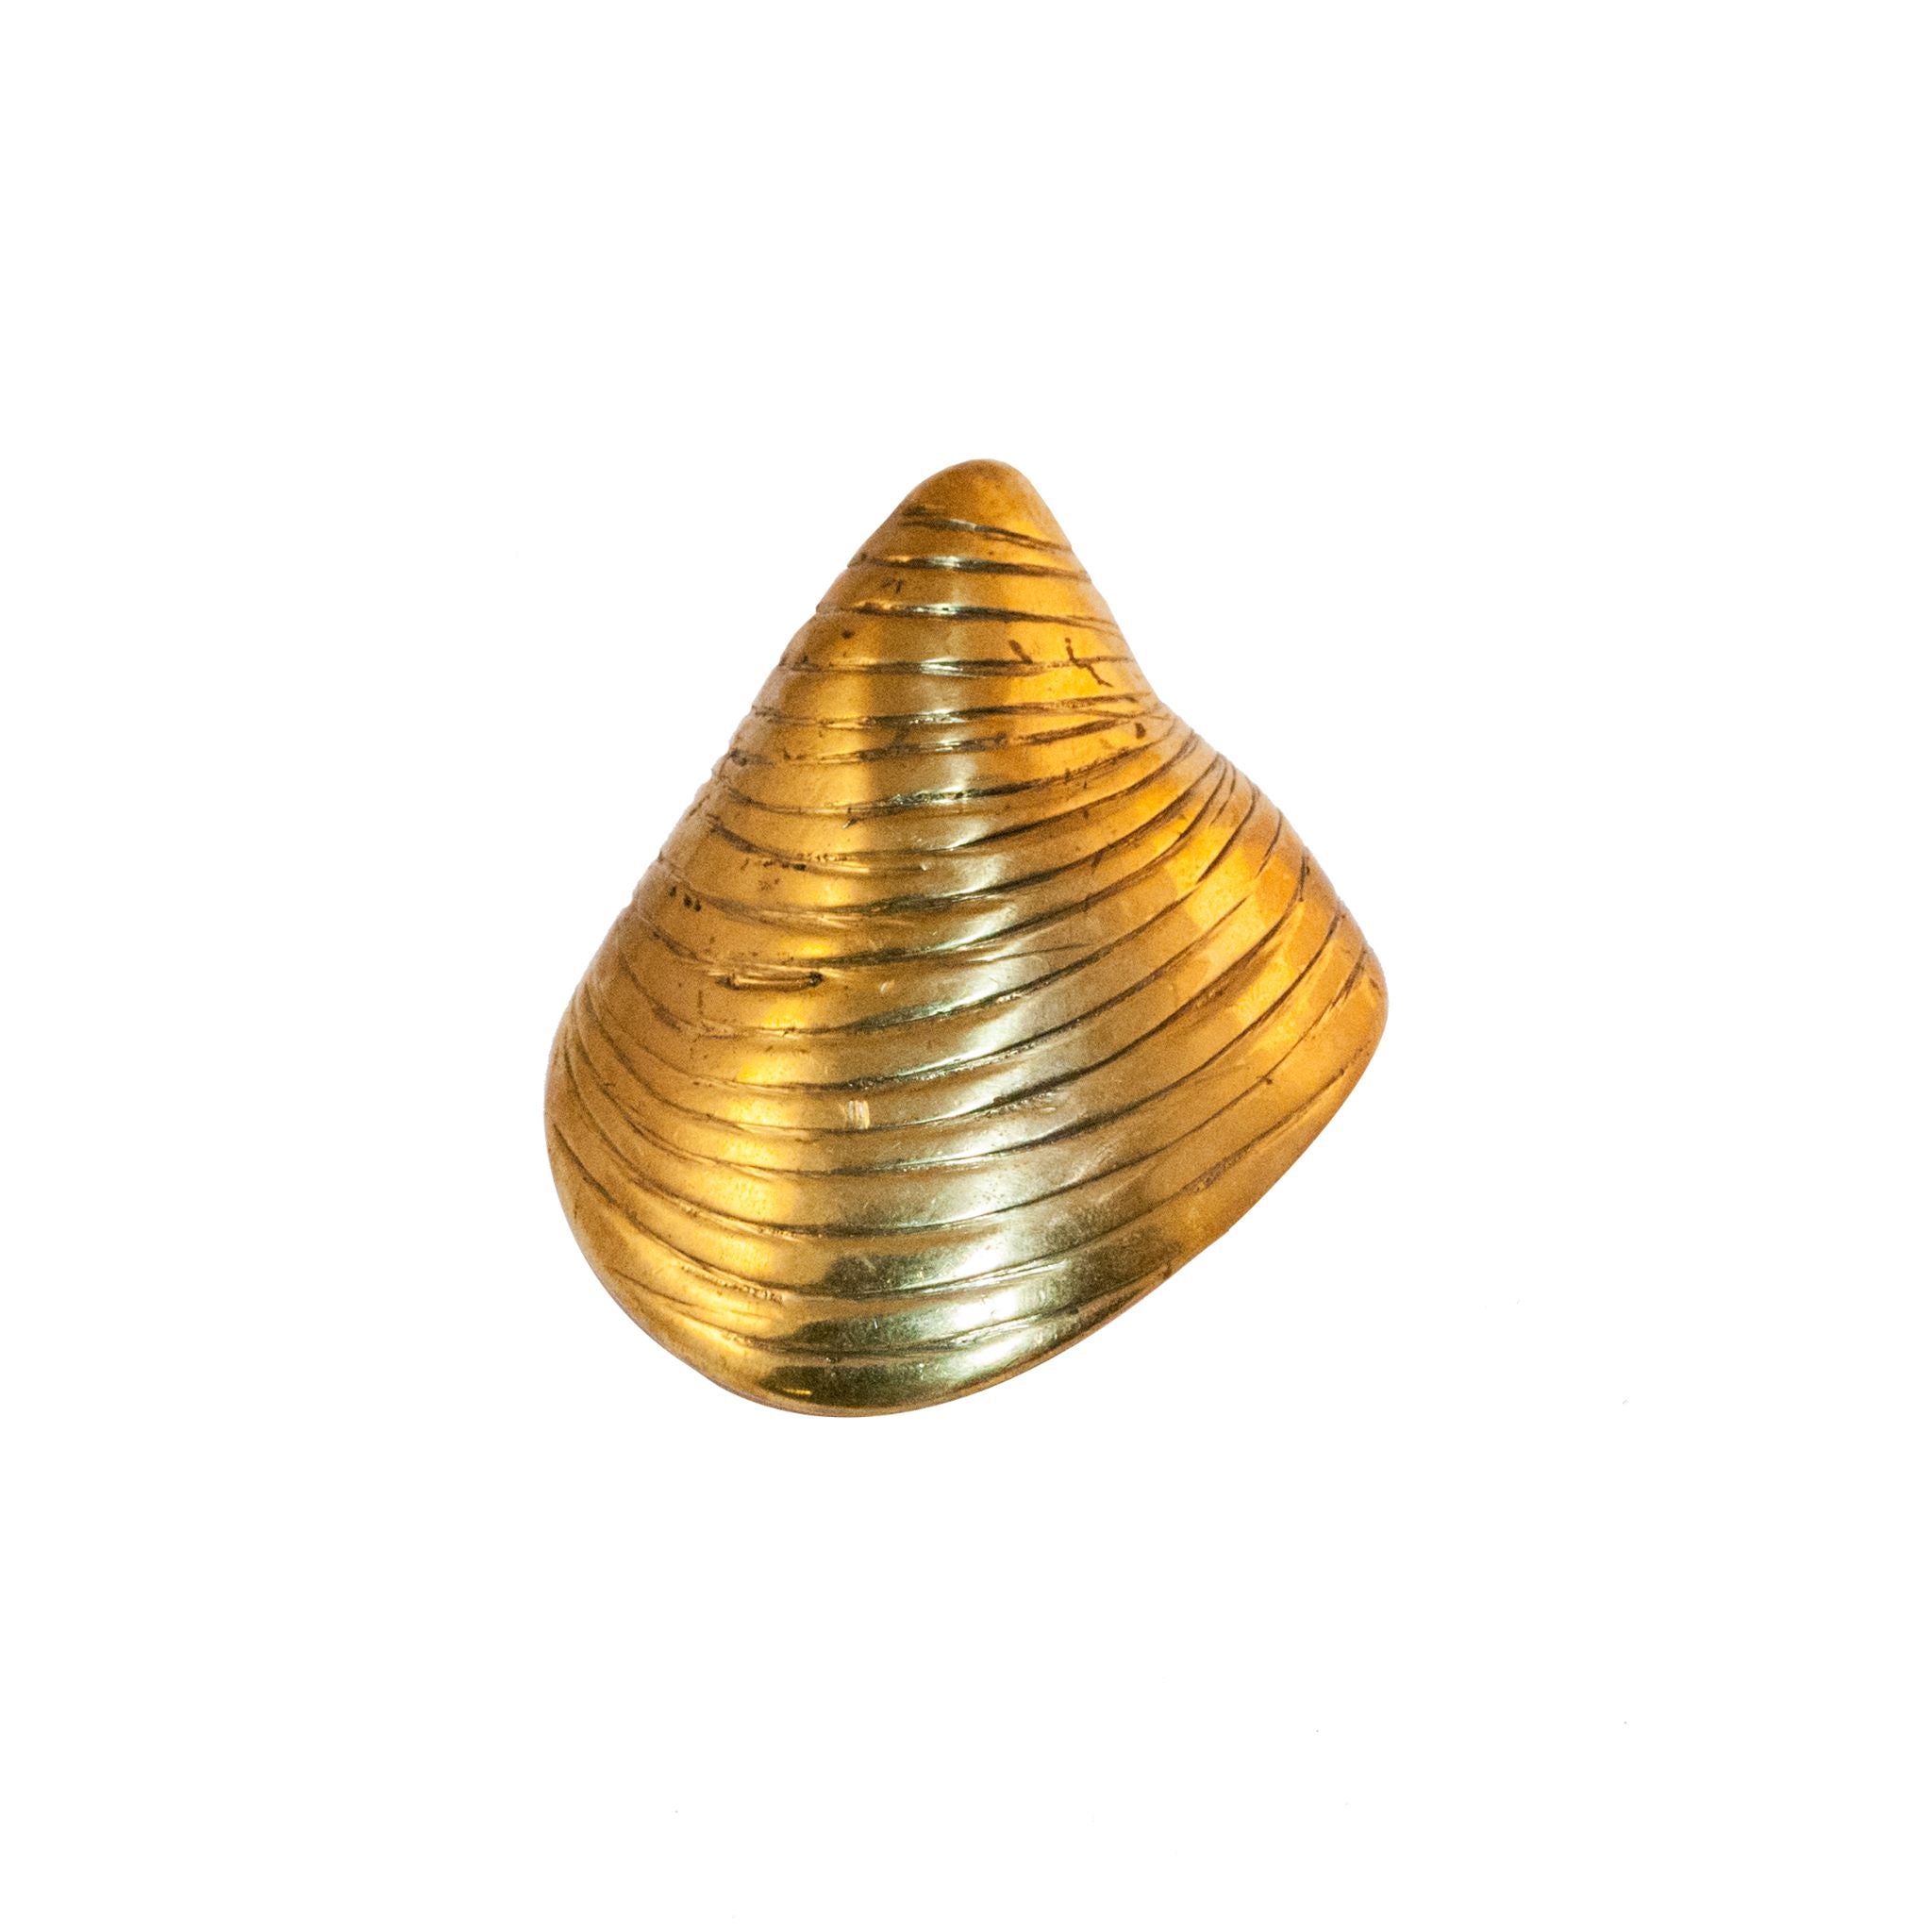 Brass knob resembling a detailed shell from the Capri collection, designed to enhance cabinets, drawers, and doors with coastal-inspired elegance.